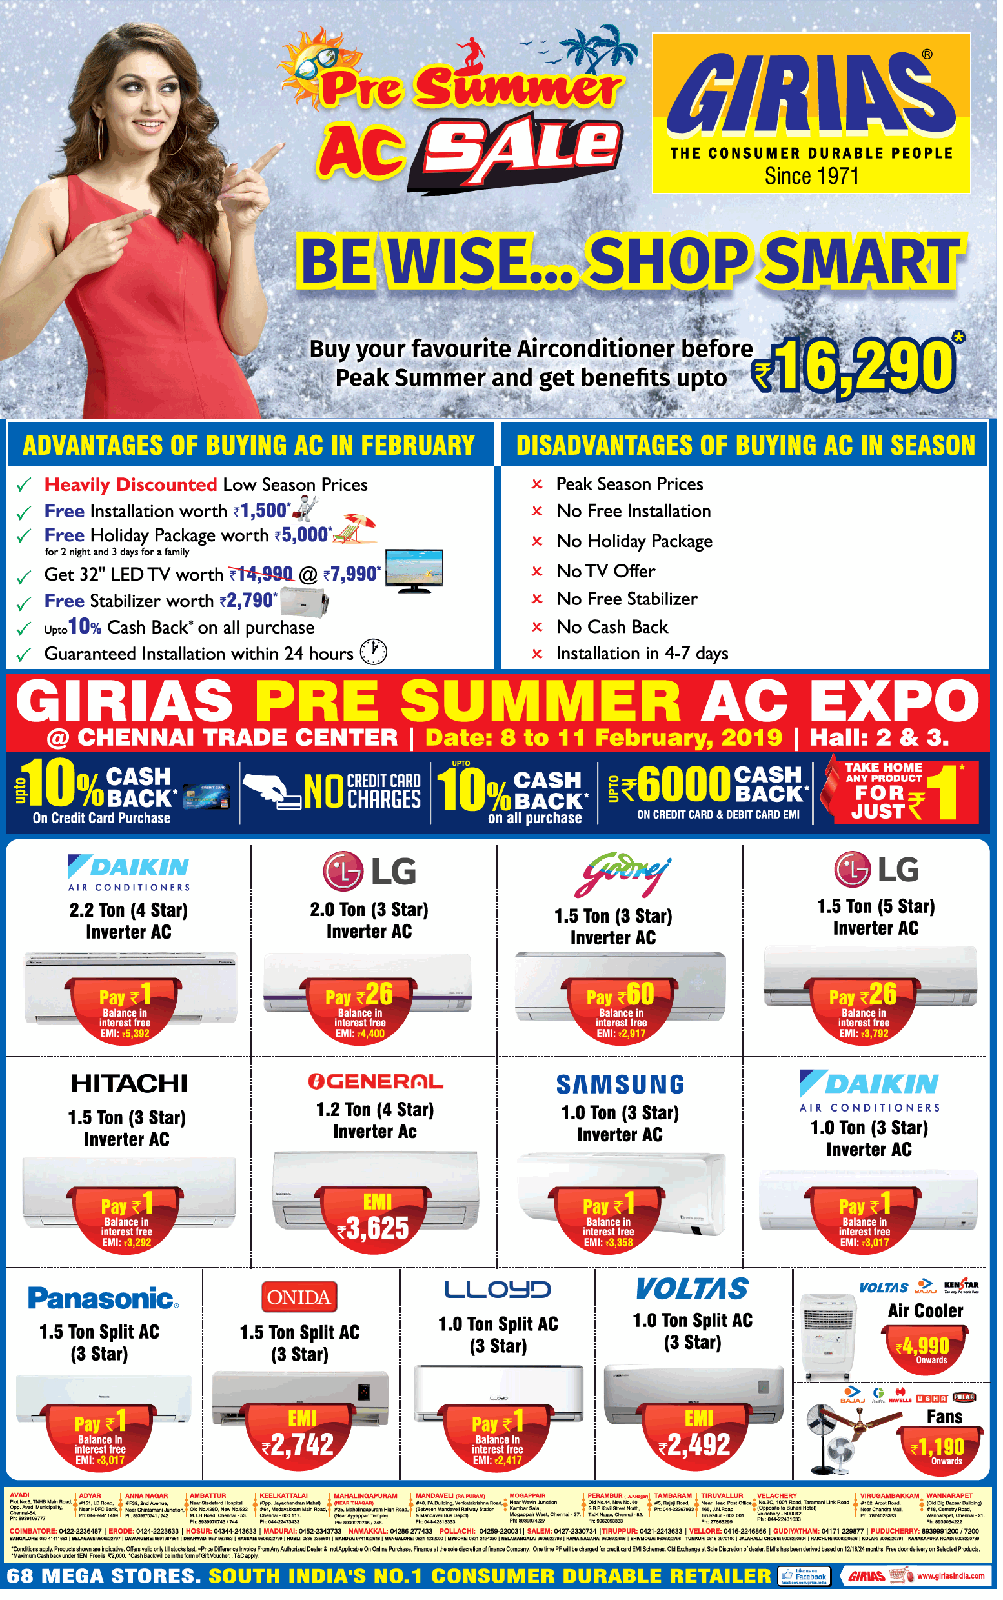 girias-pre-summer-ac-sale-be-wise-shop-smart-ad-times-of-india-chennai-09-02-2019.png